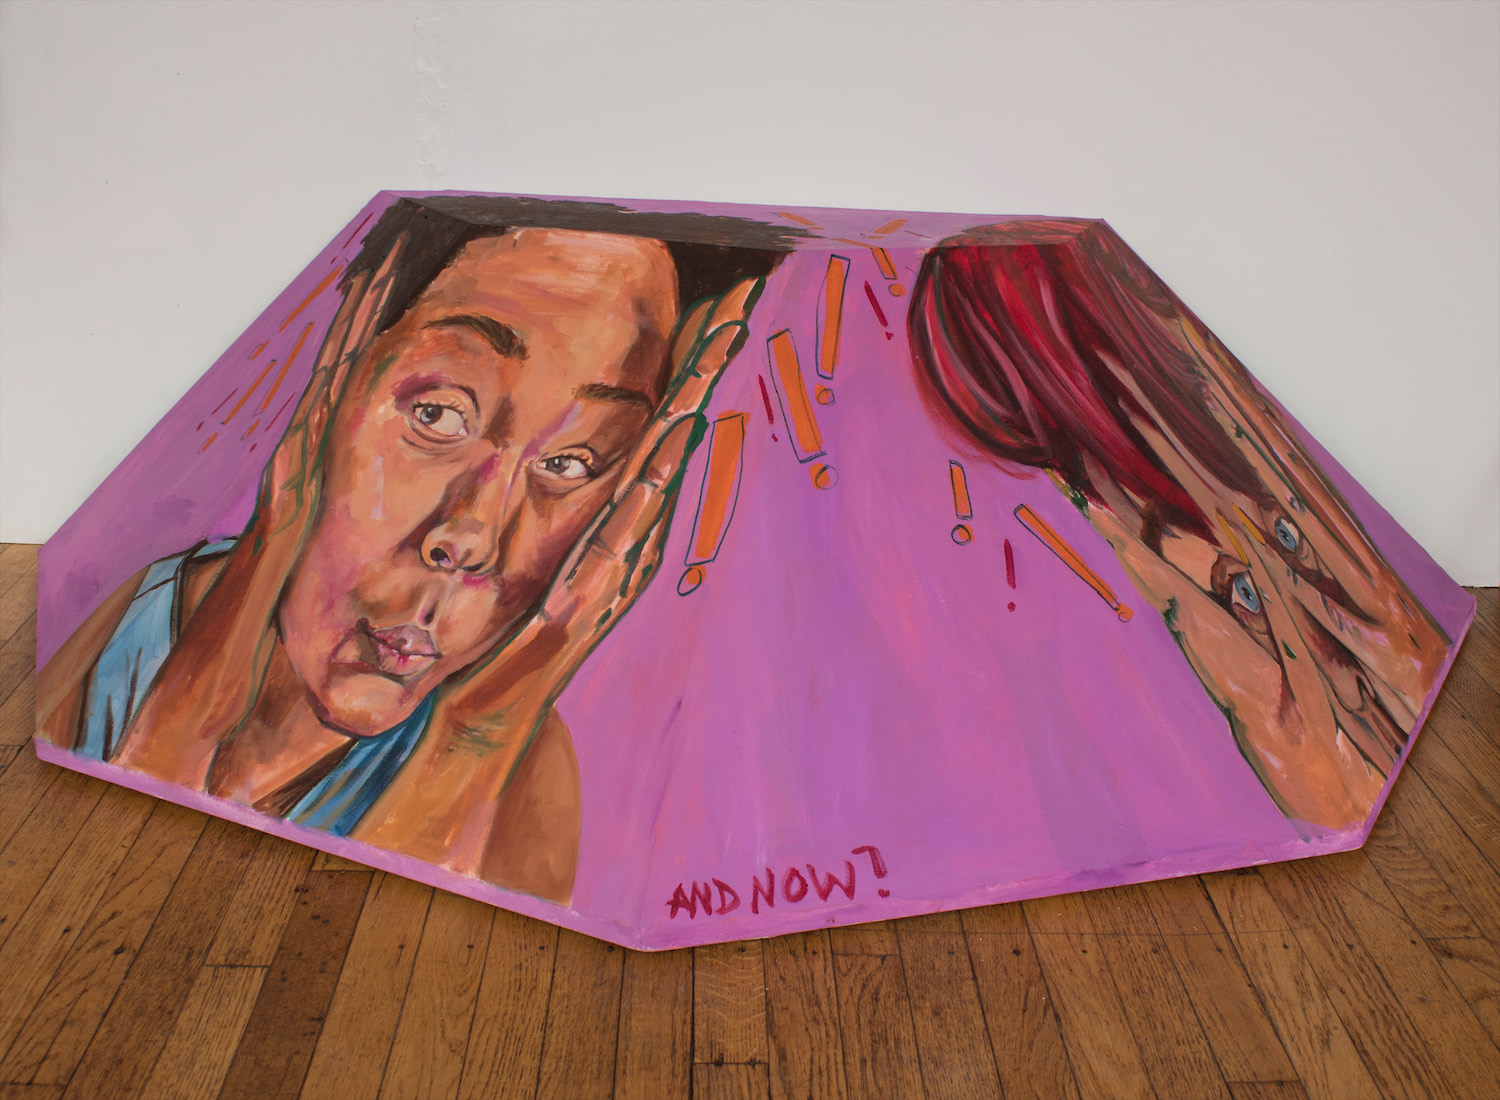 This shows the third artwork which is an octagonal shape cut in half and displayed on the floor and against the wall. There are two figures on this bright purple painted shaped canvas frame. Both are peeking through their hands to view whats in front of them. This is the first view that shows more of the figure on the left.